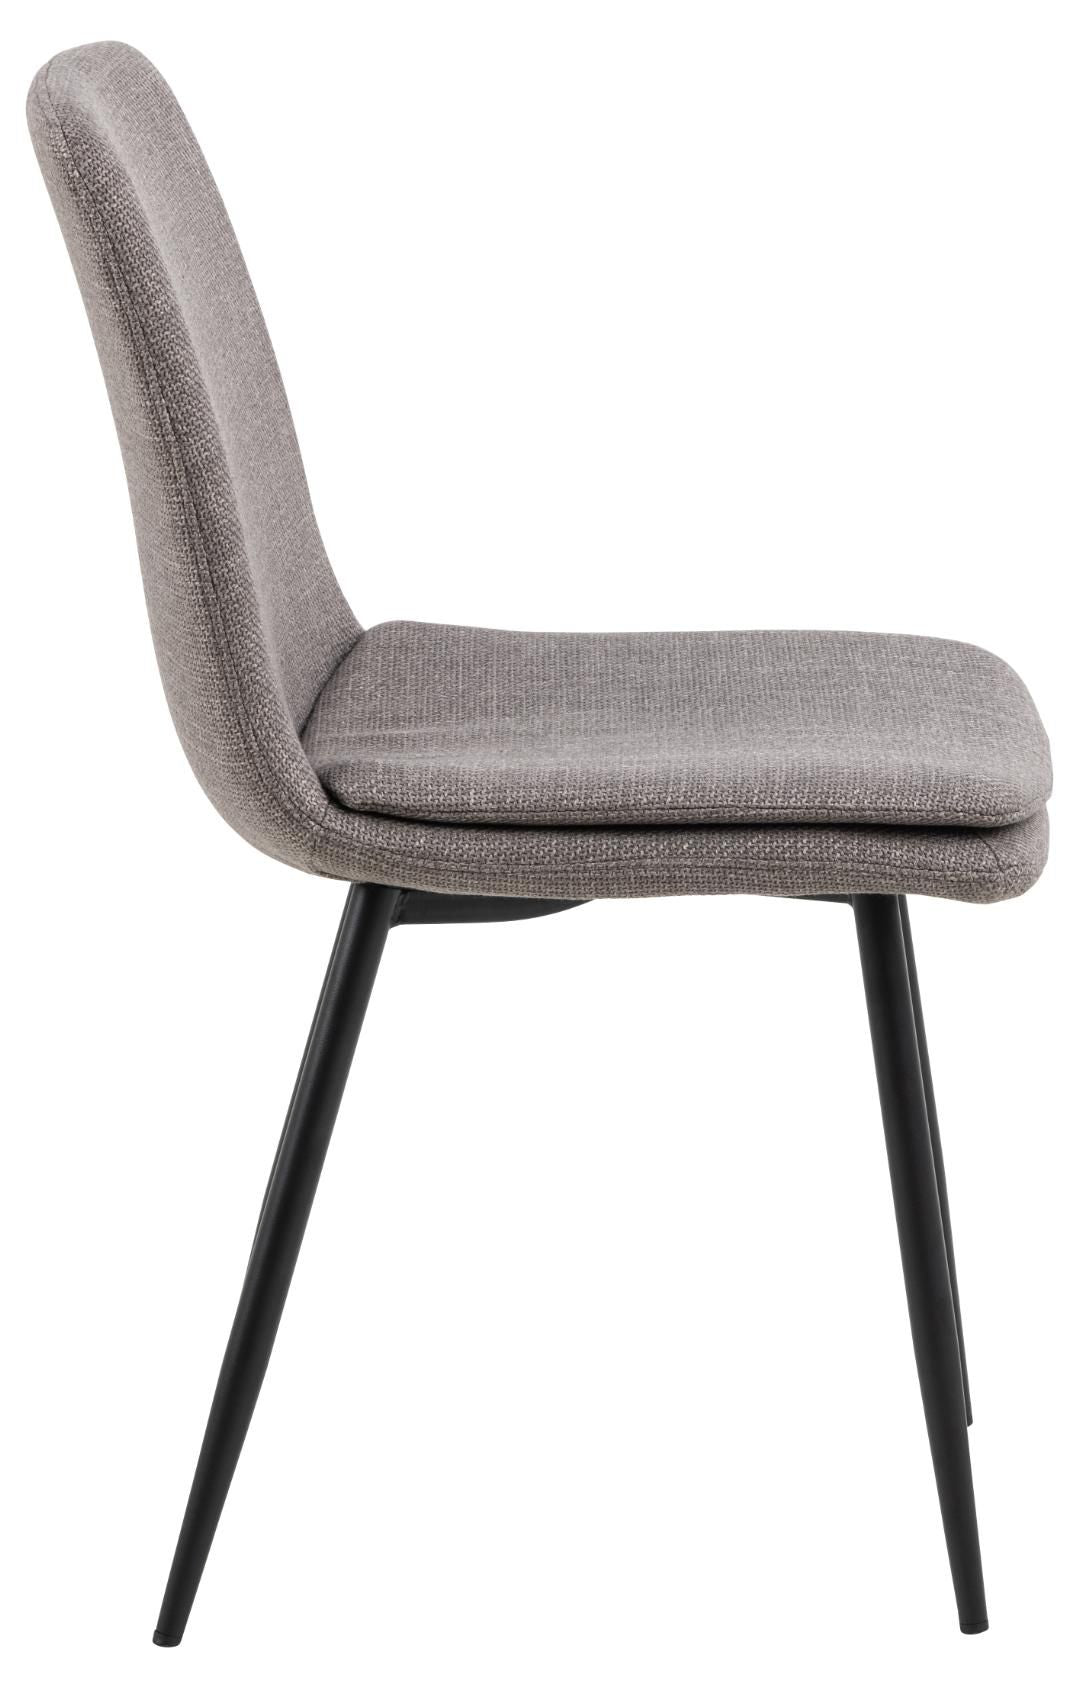 Becca dining chair